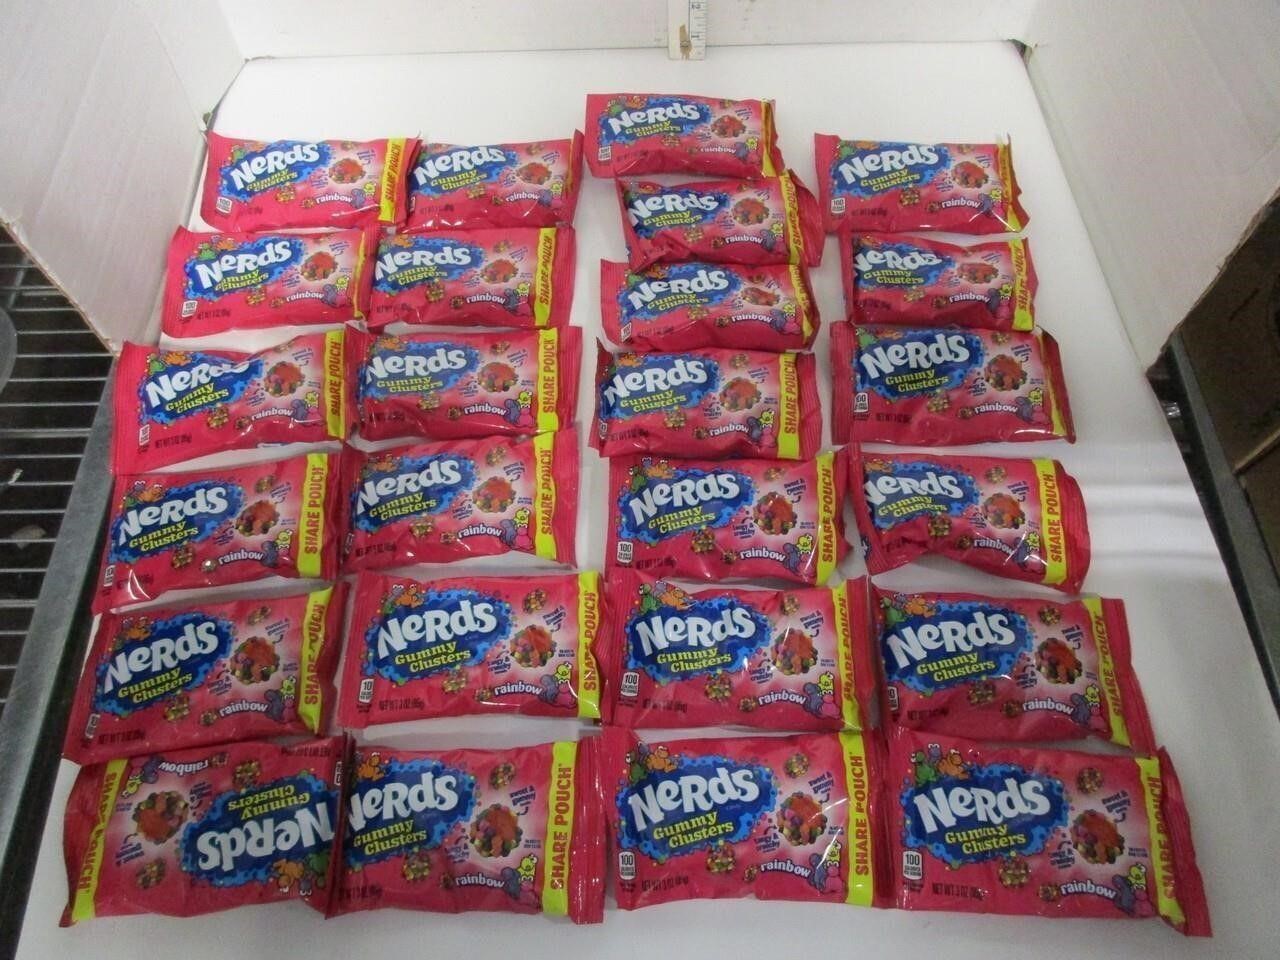 25 Nerds Gummy Clusters - Exp 2/24